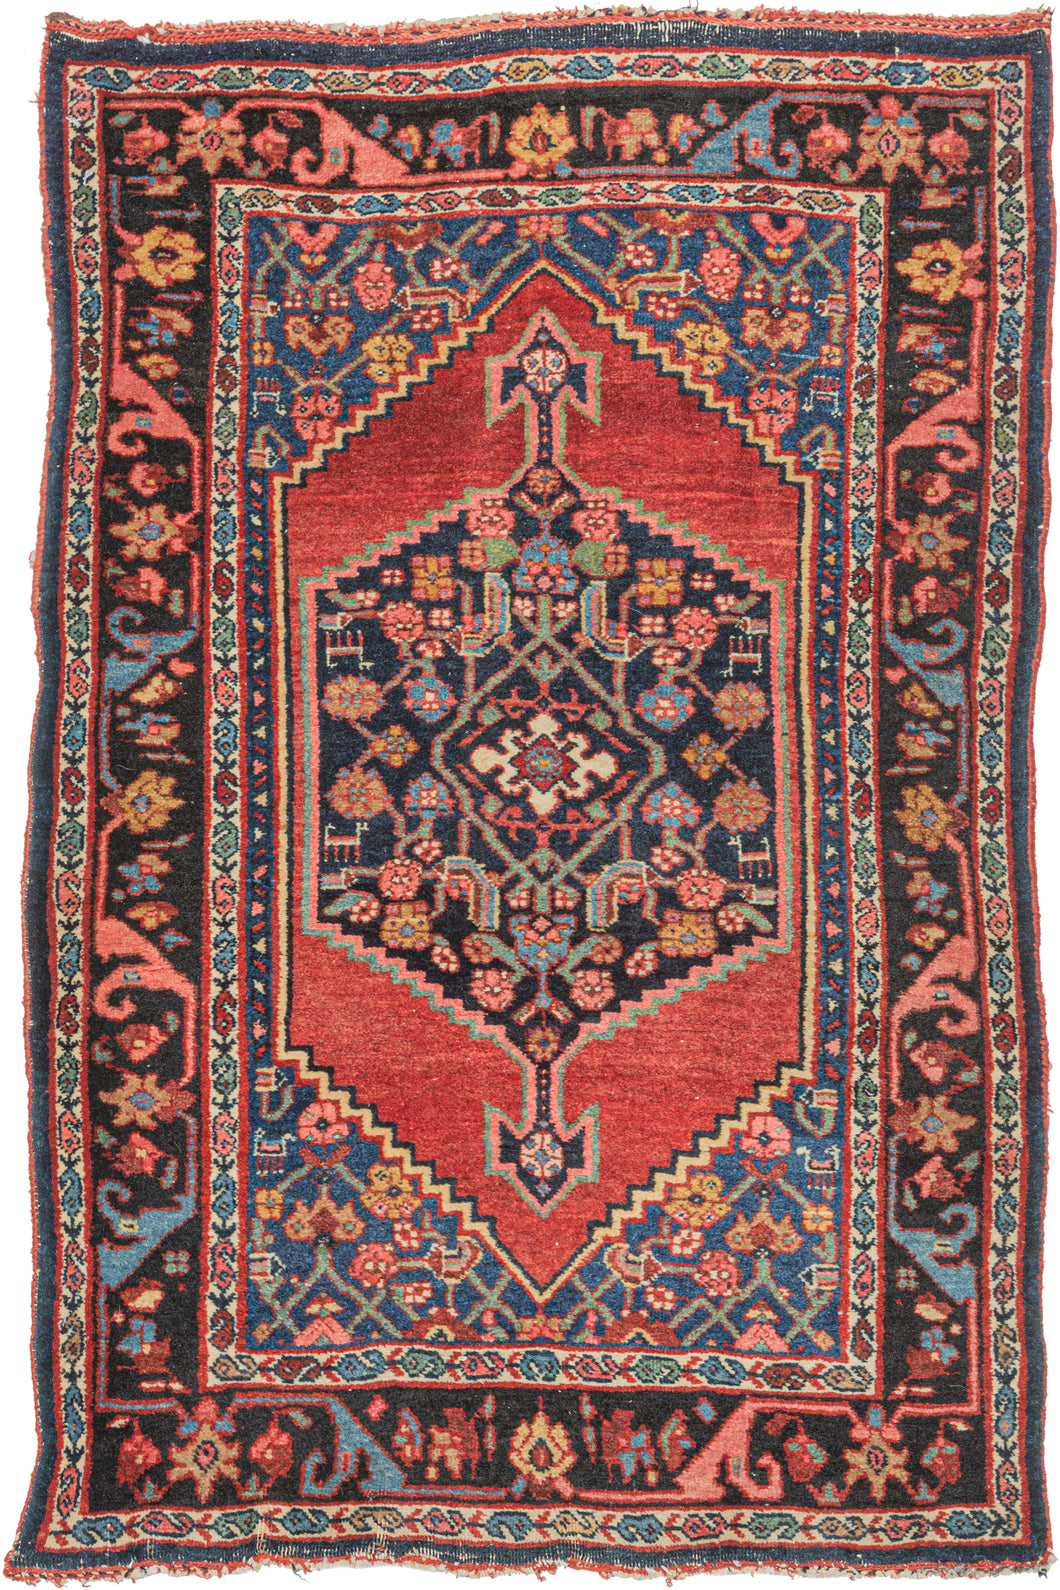 antique Persian Bidjar scatter rug featuring a midnight blue central medallion floating atop an open and undulating red lacquer field. A variation of the herati design can be found in both the medallion and the cornices which are rendered in blues, greens, pinks, and yellow. Upon closer inspection, various abstracted animals can be found in the pattern. 